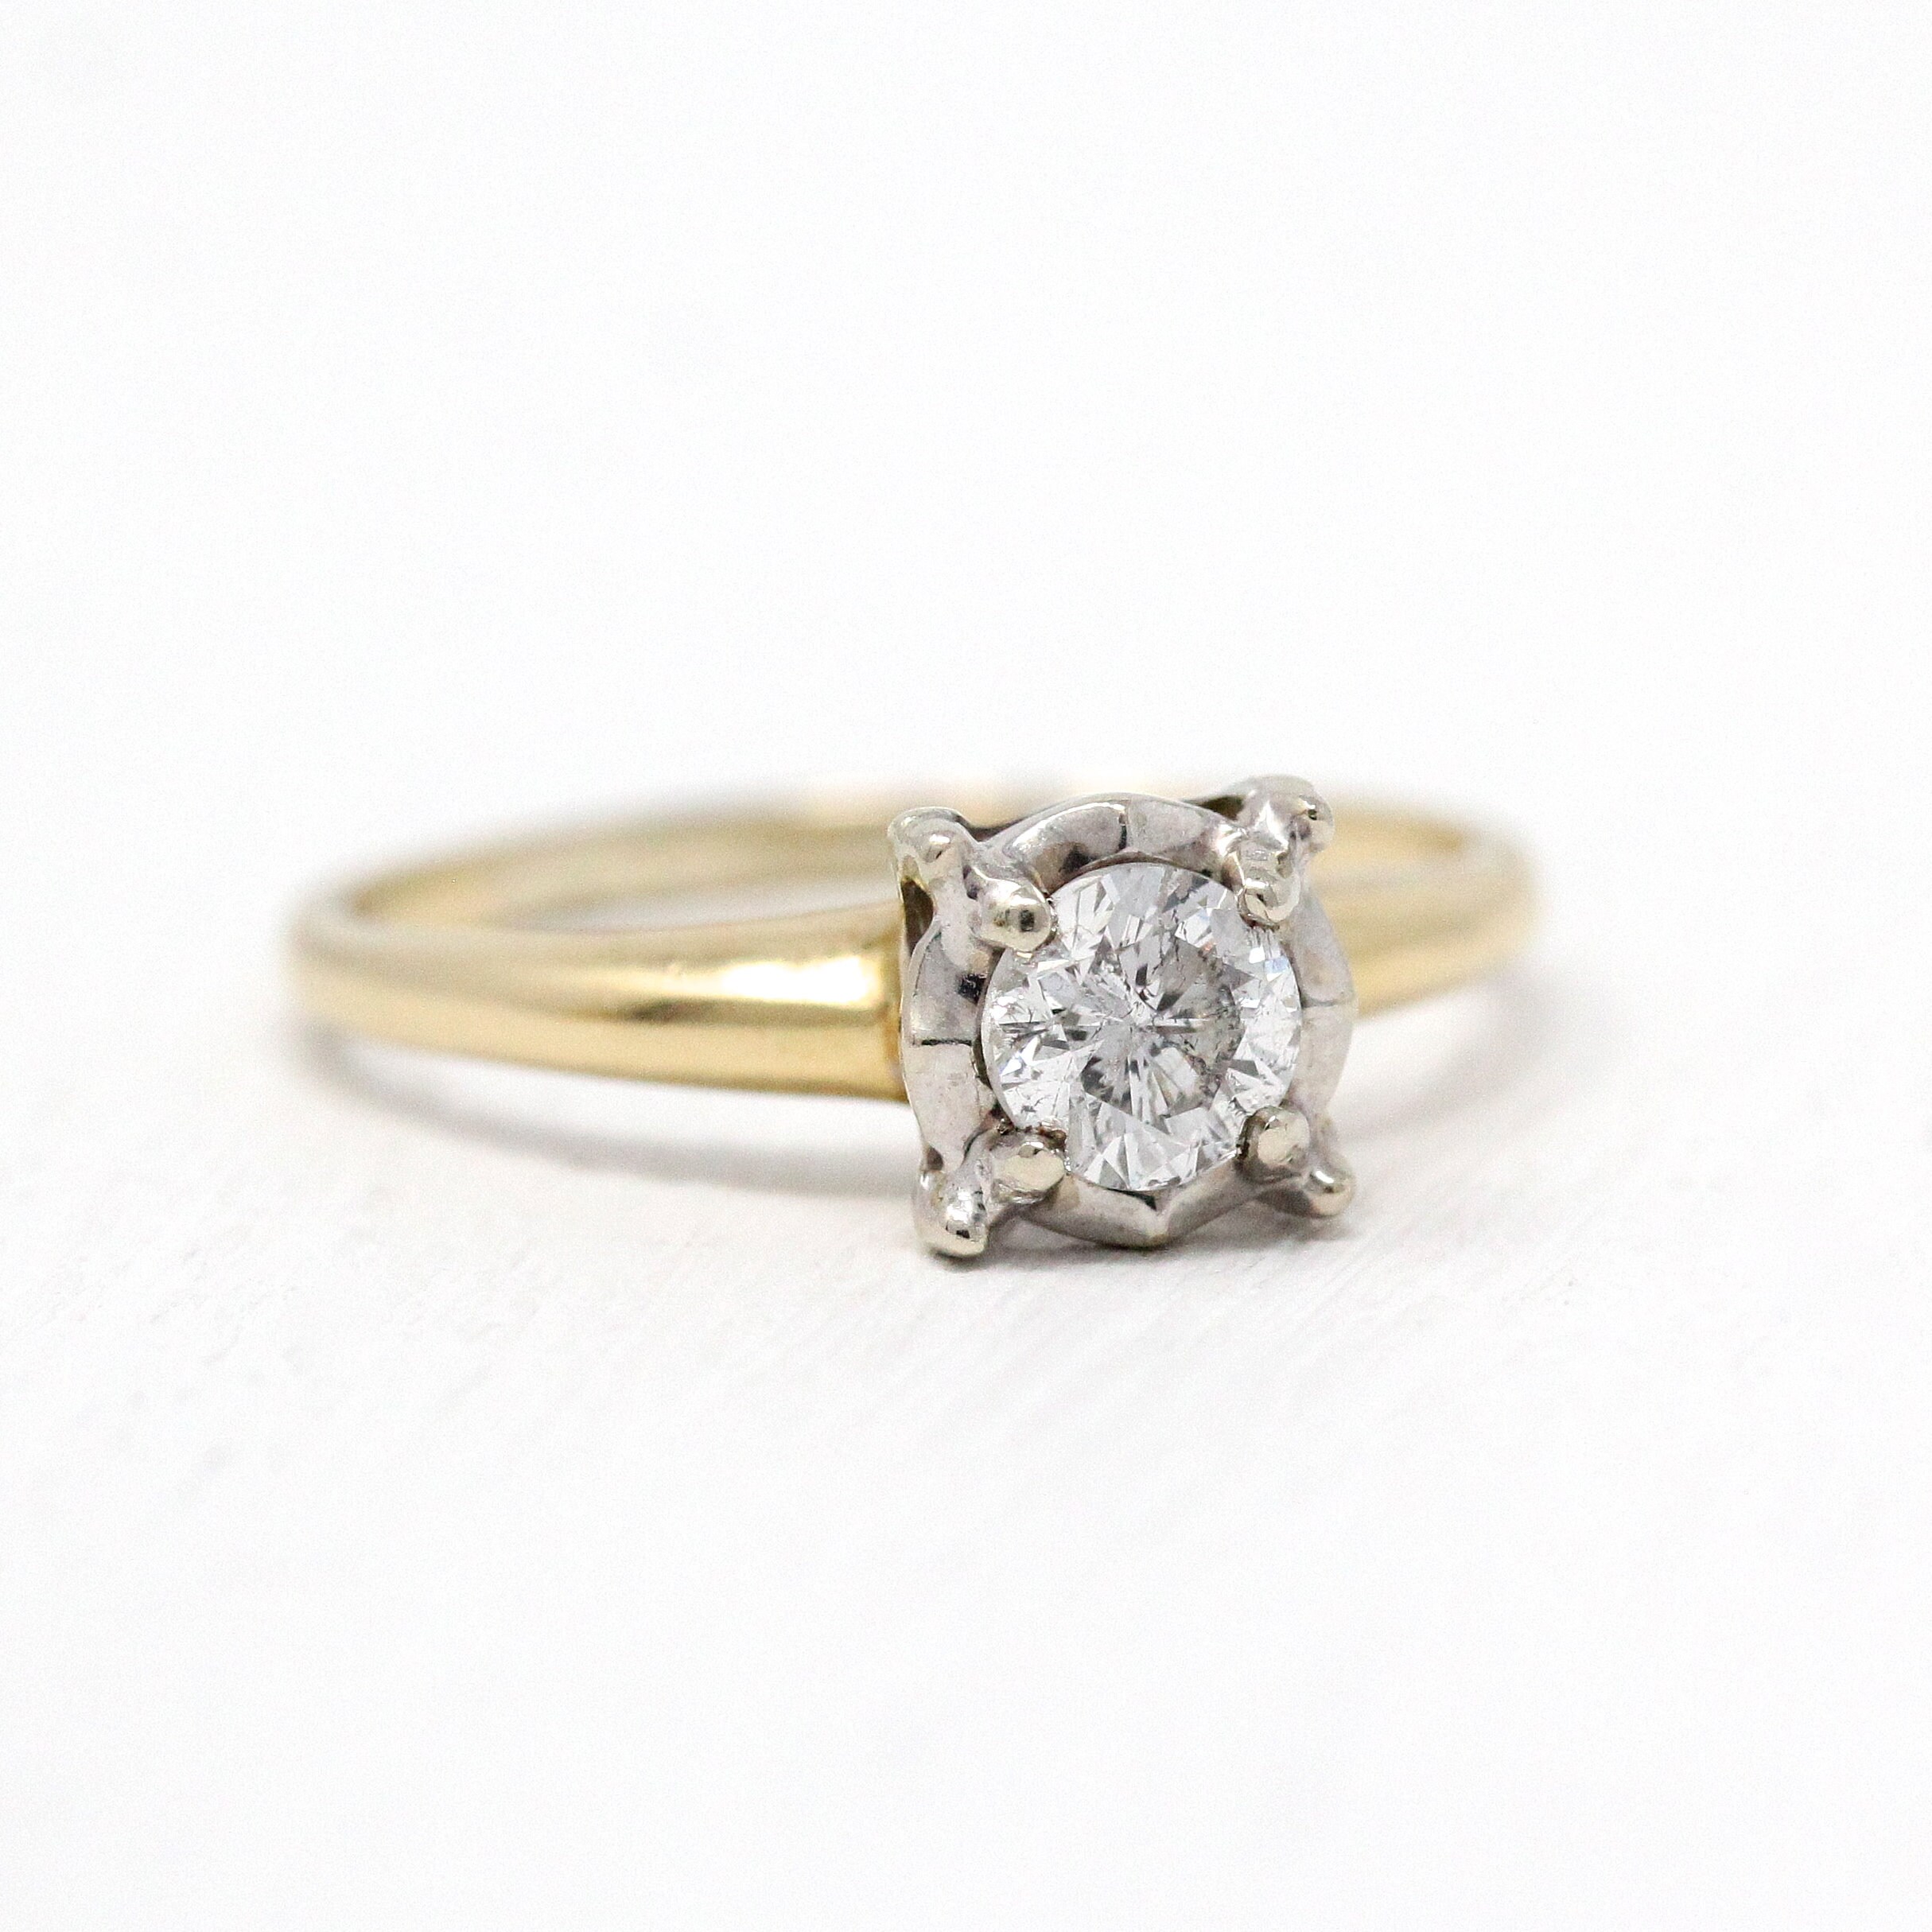 Fine Jewellery Vintage Diamond Engagement Ring For Her 2.40 Ct ...